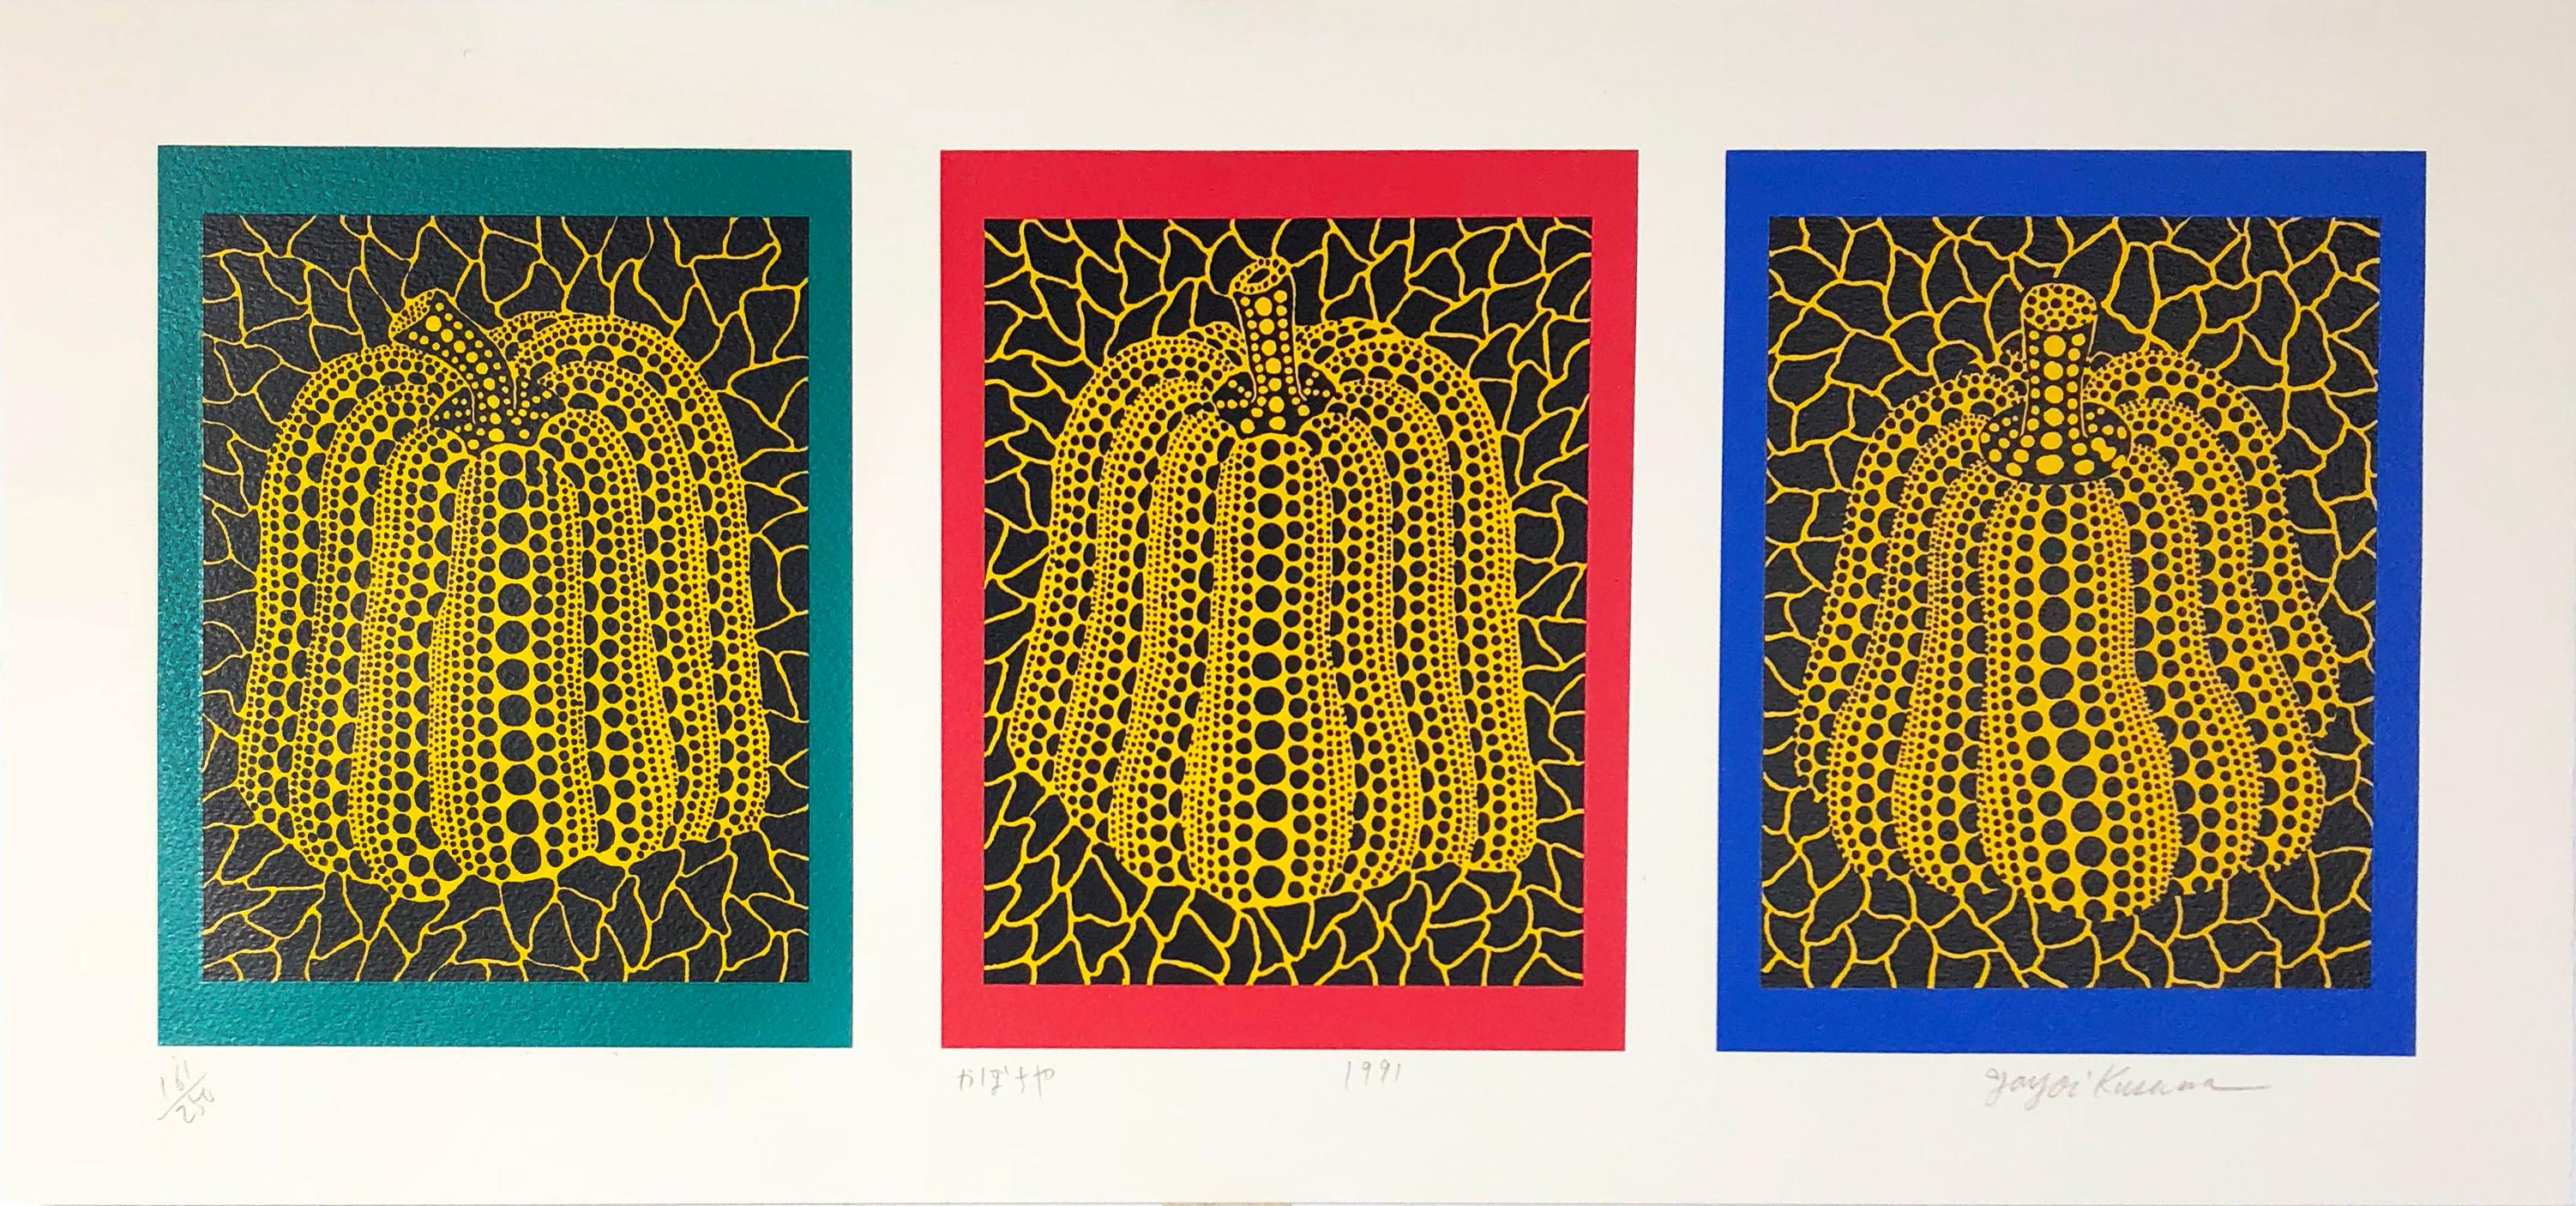 Yayoi Kusama
"Pumpkin"
1991
Silkscreen
11 x 23 1/2 inches
Edition of 250, signed and numbered
Known for her Mirrored Rooms, Kusama is one of the most important and interesting living artists in Japan. 